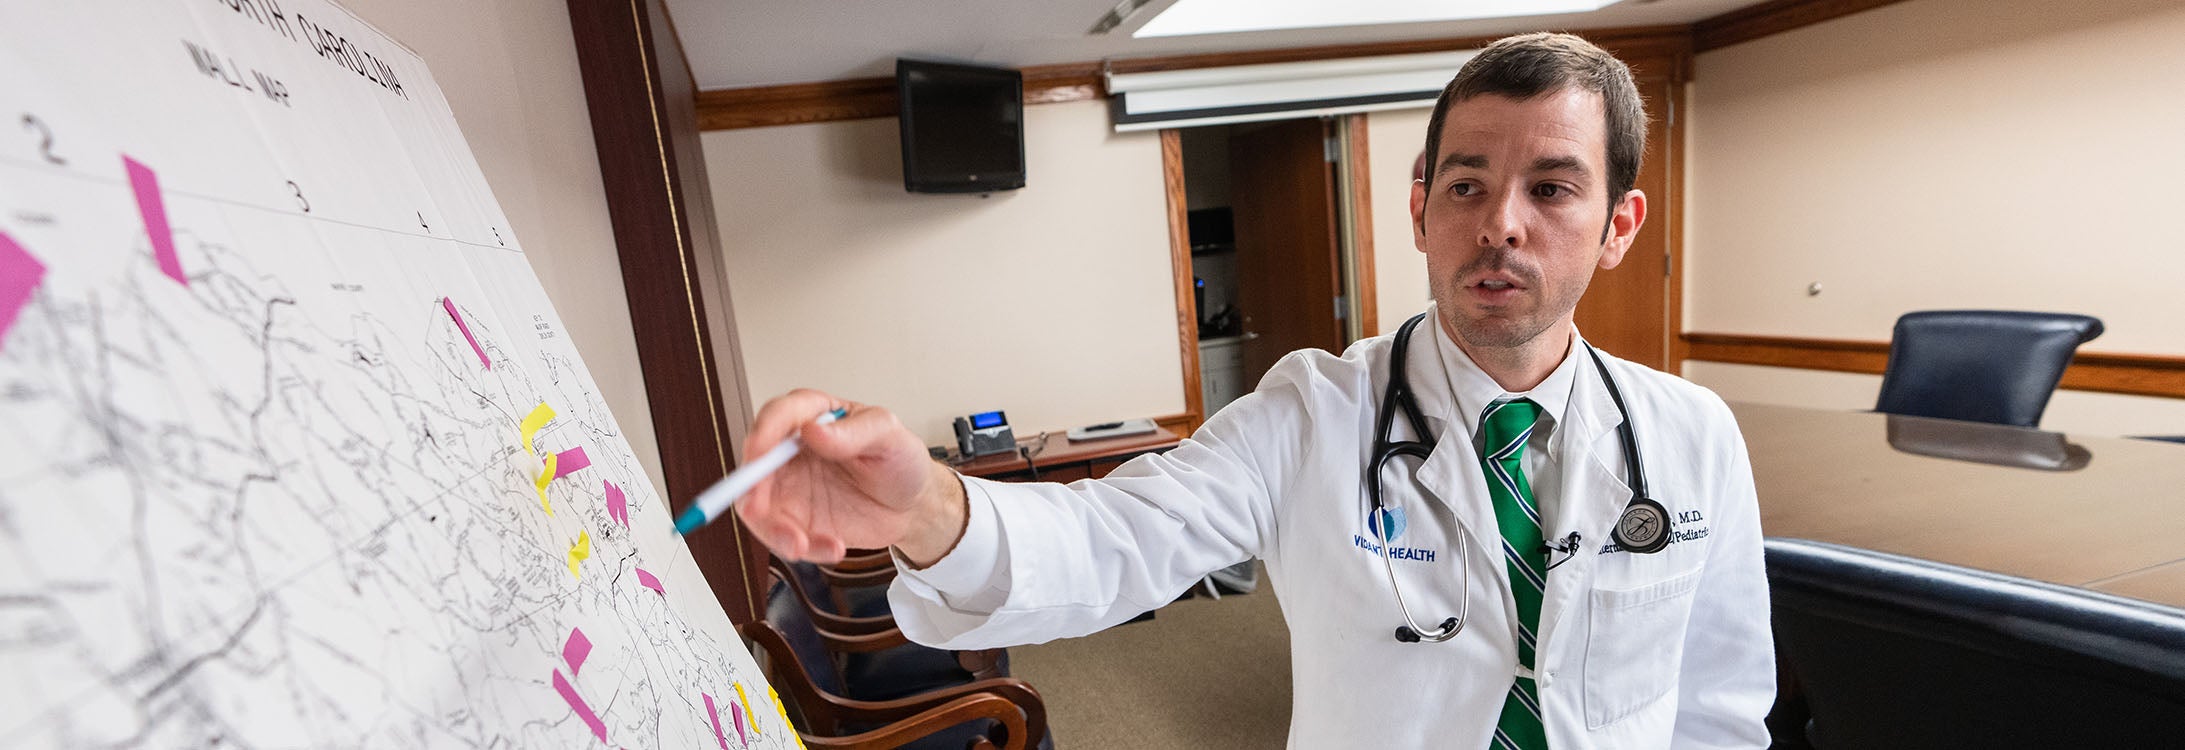 Brody School of Medicine graduate Dr. Jon Kornegay helped to lead health care delivery efforts in the rural Duplin County after flooding and destruction from Hurricane Florence in 2018 blocked roads and knocked out power at Vidant Duplin Hospital.